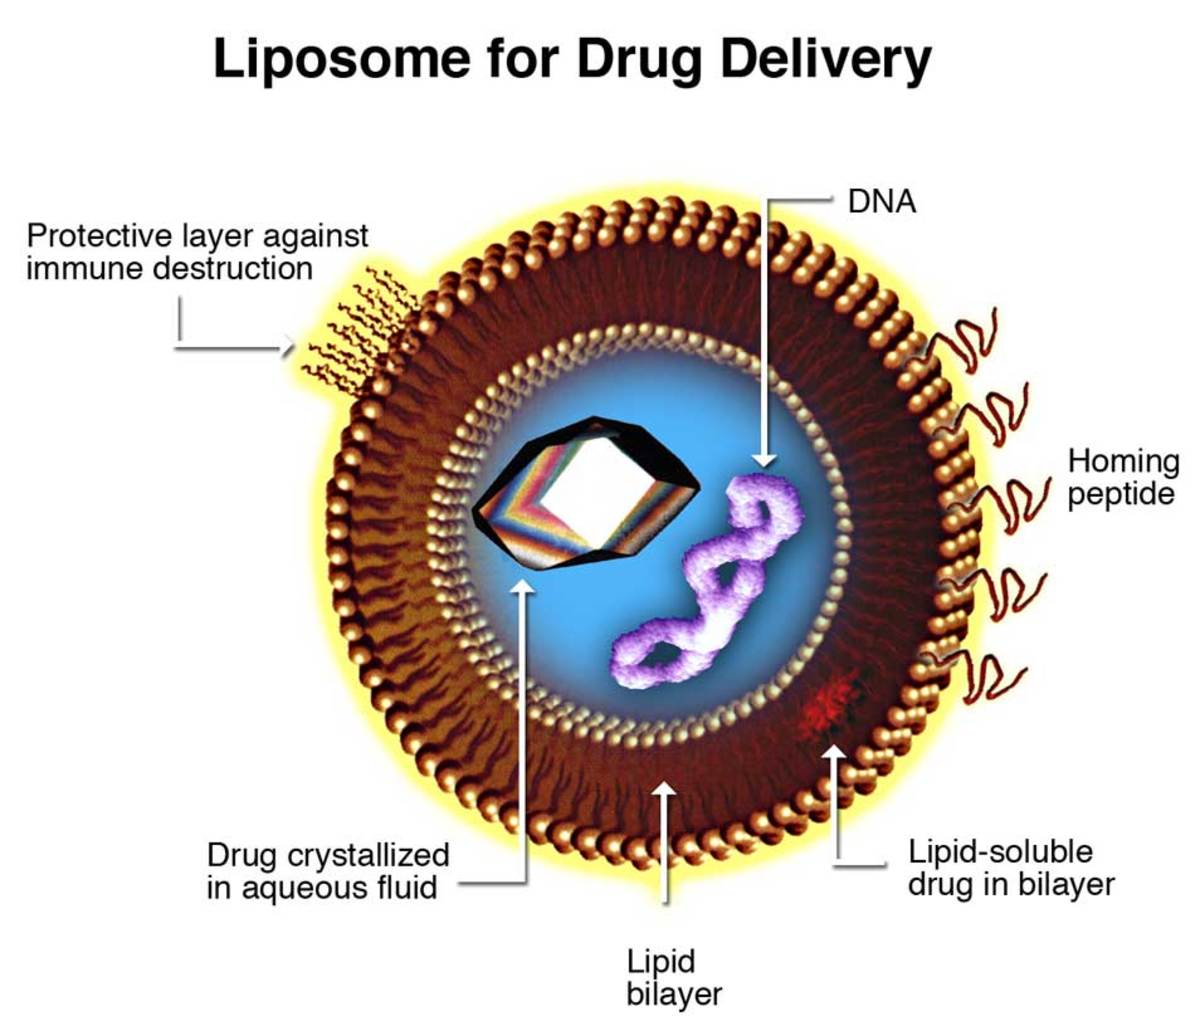 Did you know the use of doxorubicin in liposome reduces cardiac toxicity?